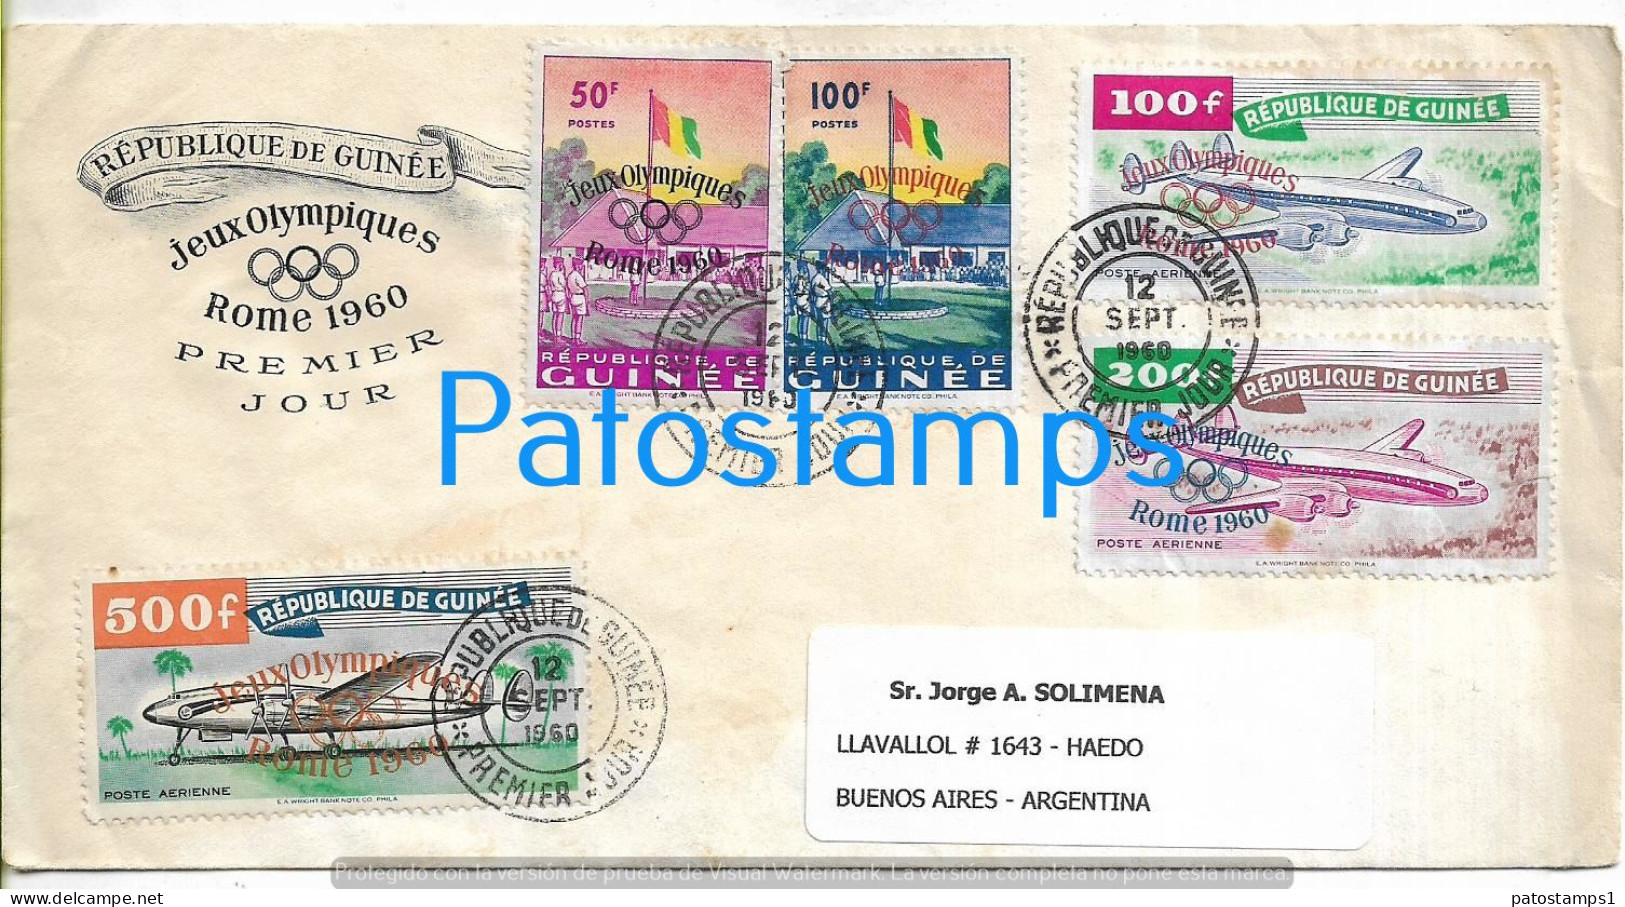 226331 AFRICA REPUBLIC GUINEE COVER CANCEL YEAR 1960 OLYMPIC GAMES CIRCULATED TO ARGENTINA NO POSTCARD - Africa (Other)